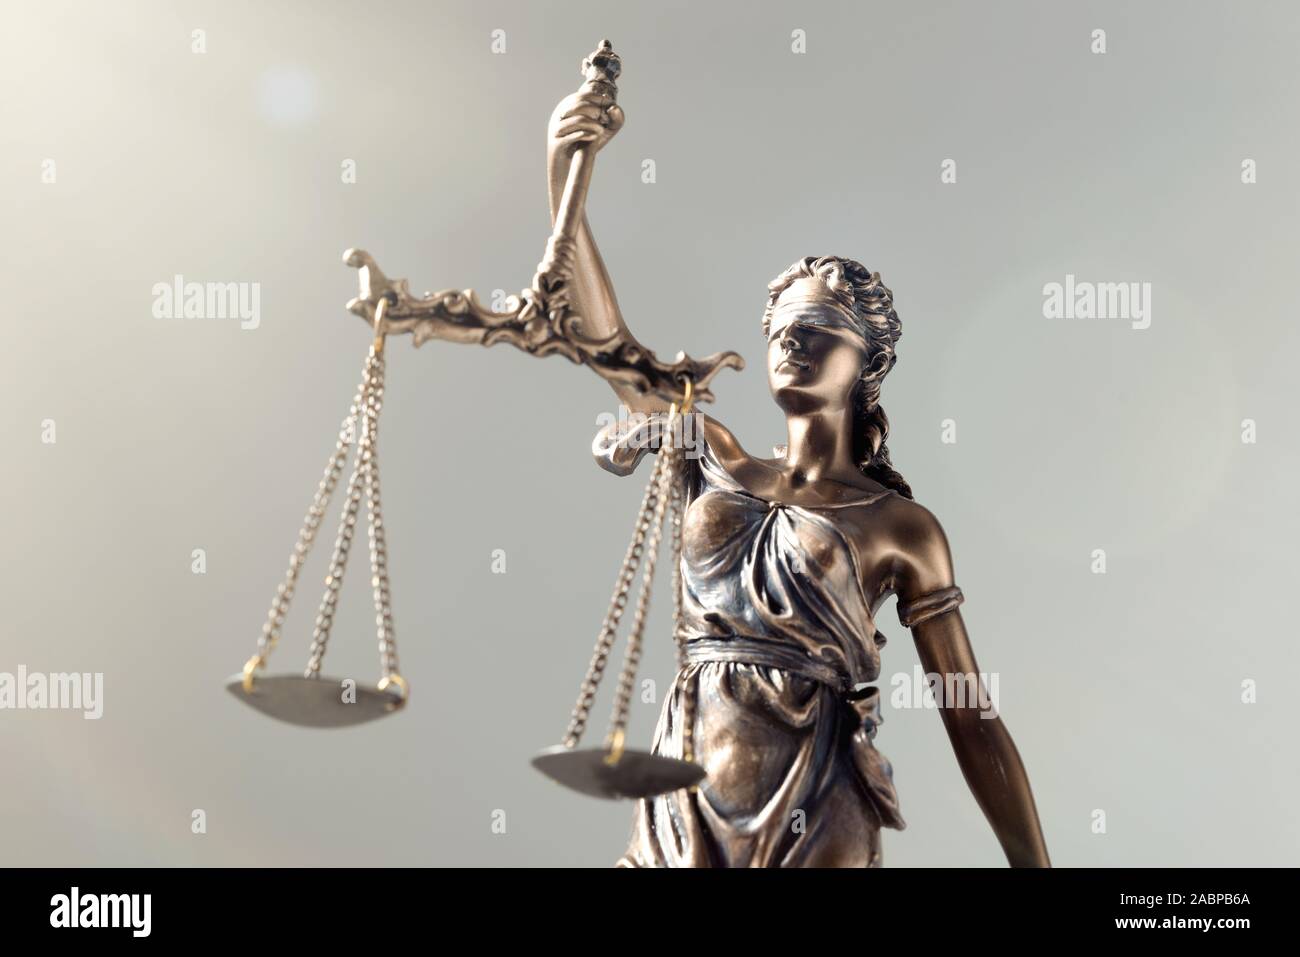 Statue of Justice - lady justice. Law, legal concept Stock Photo